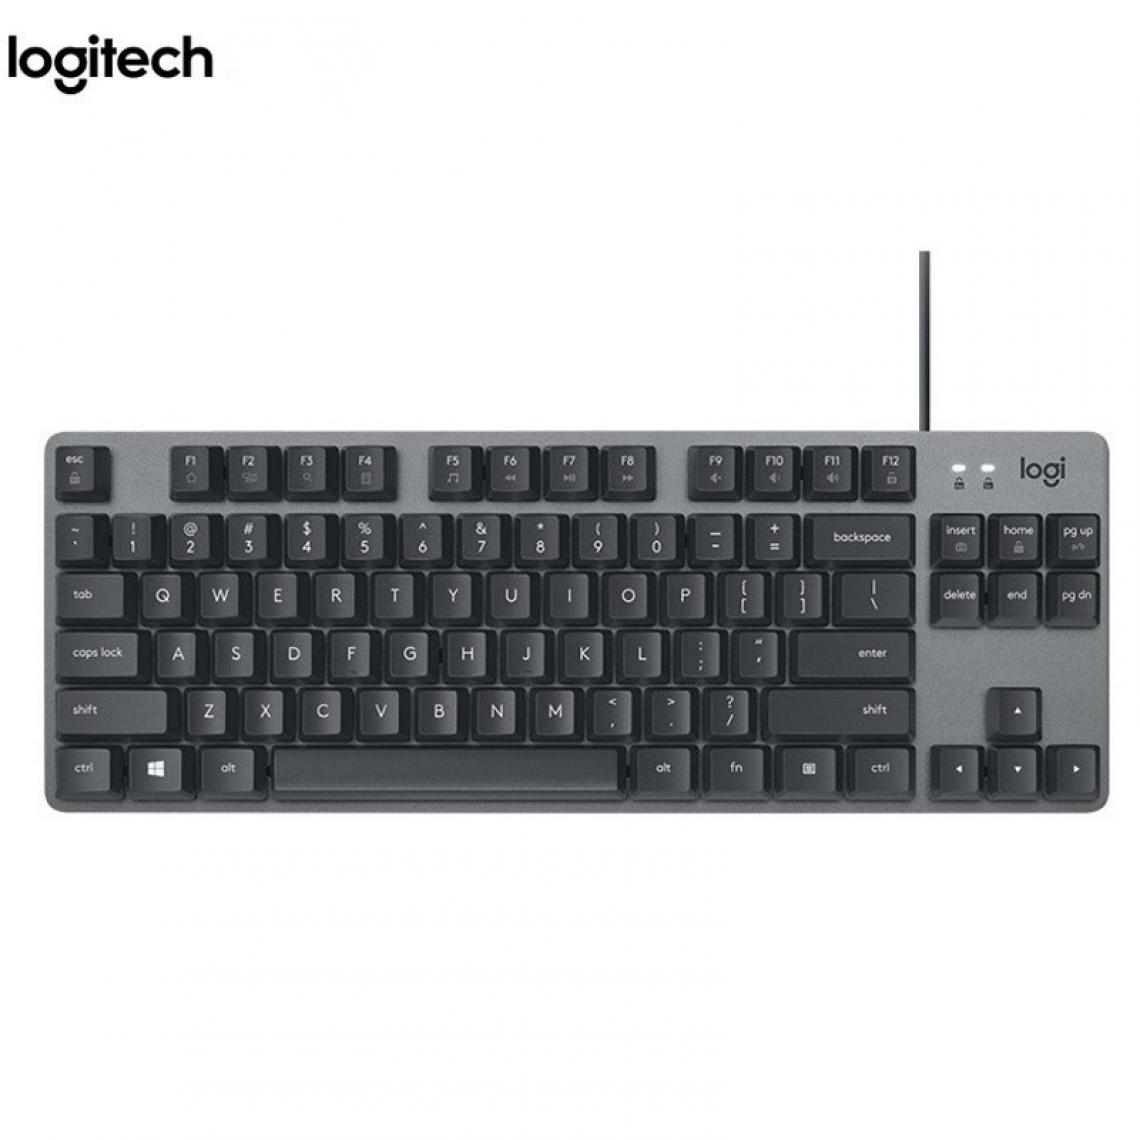 Gengyouyuan - Logitech K835 Clavier mécanique Clavier filaire Gaming Office Keyboard 84 touches - Clavier